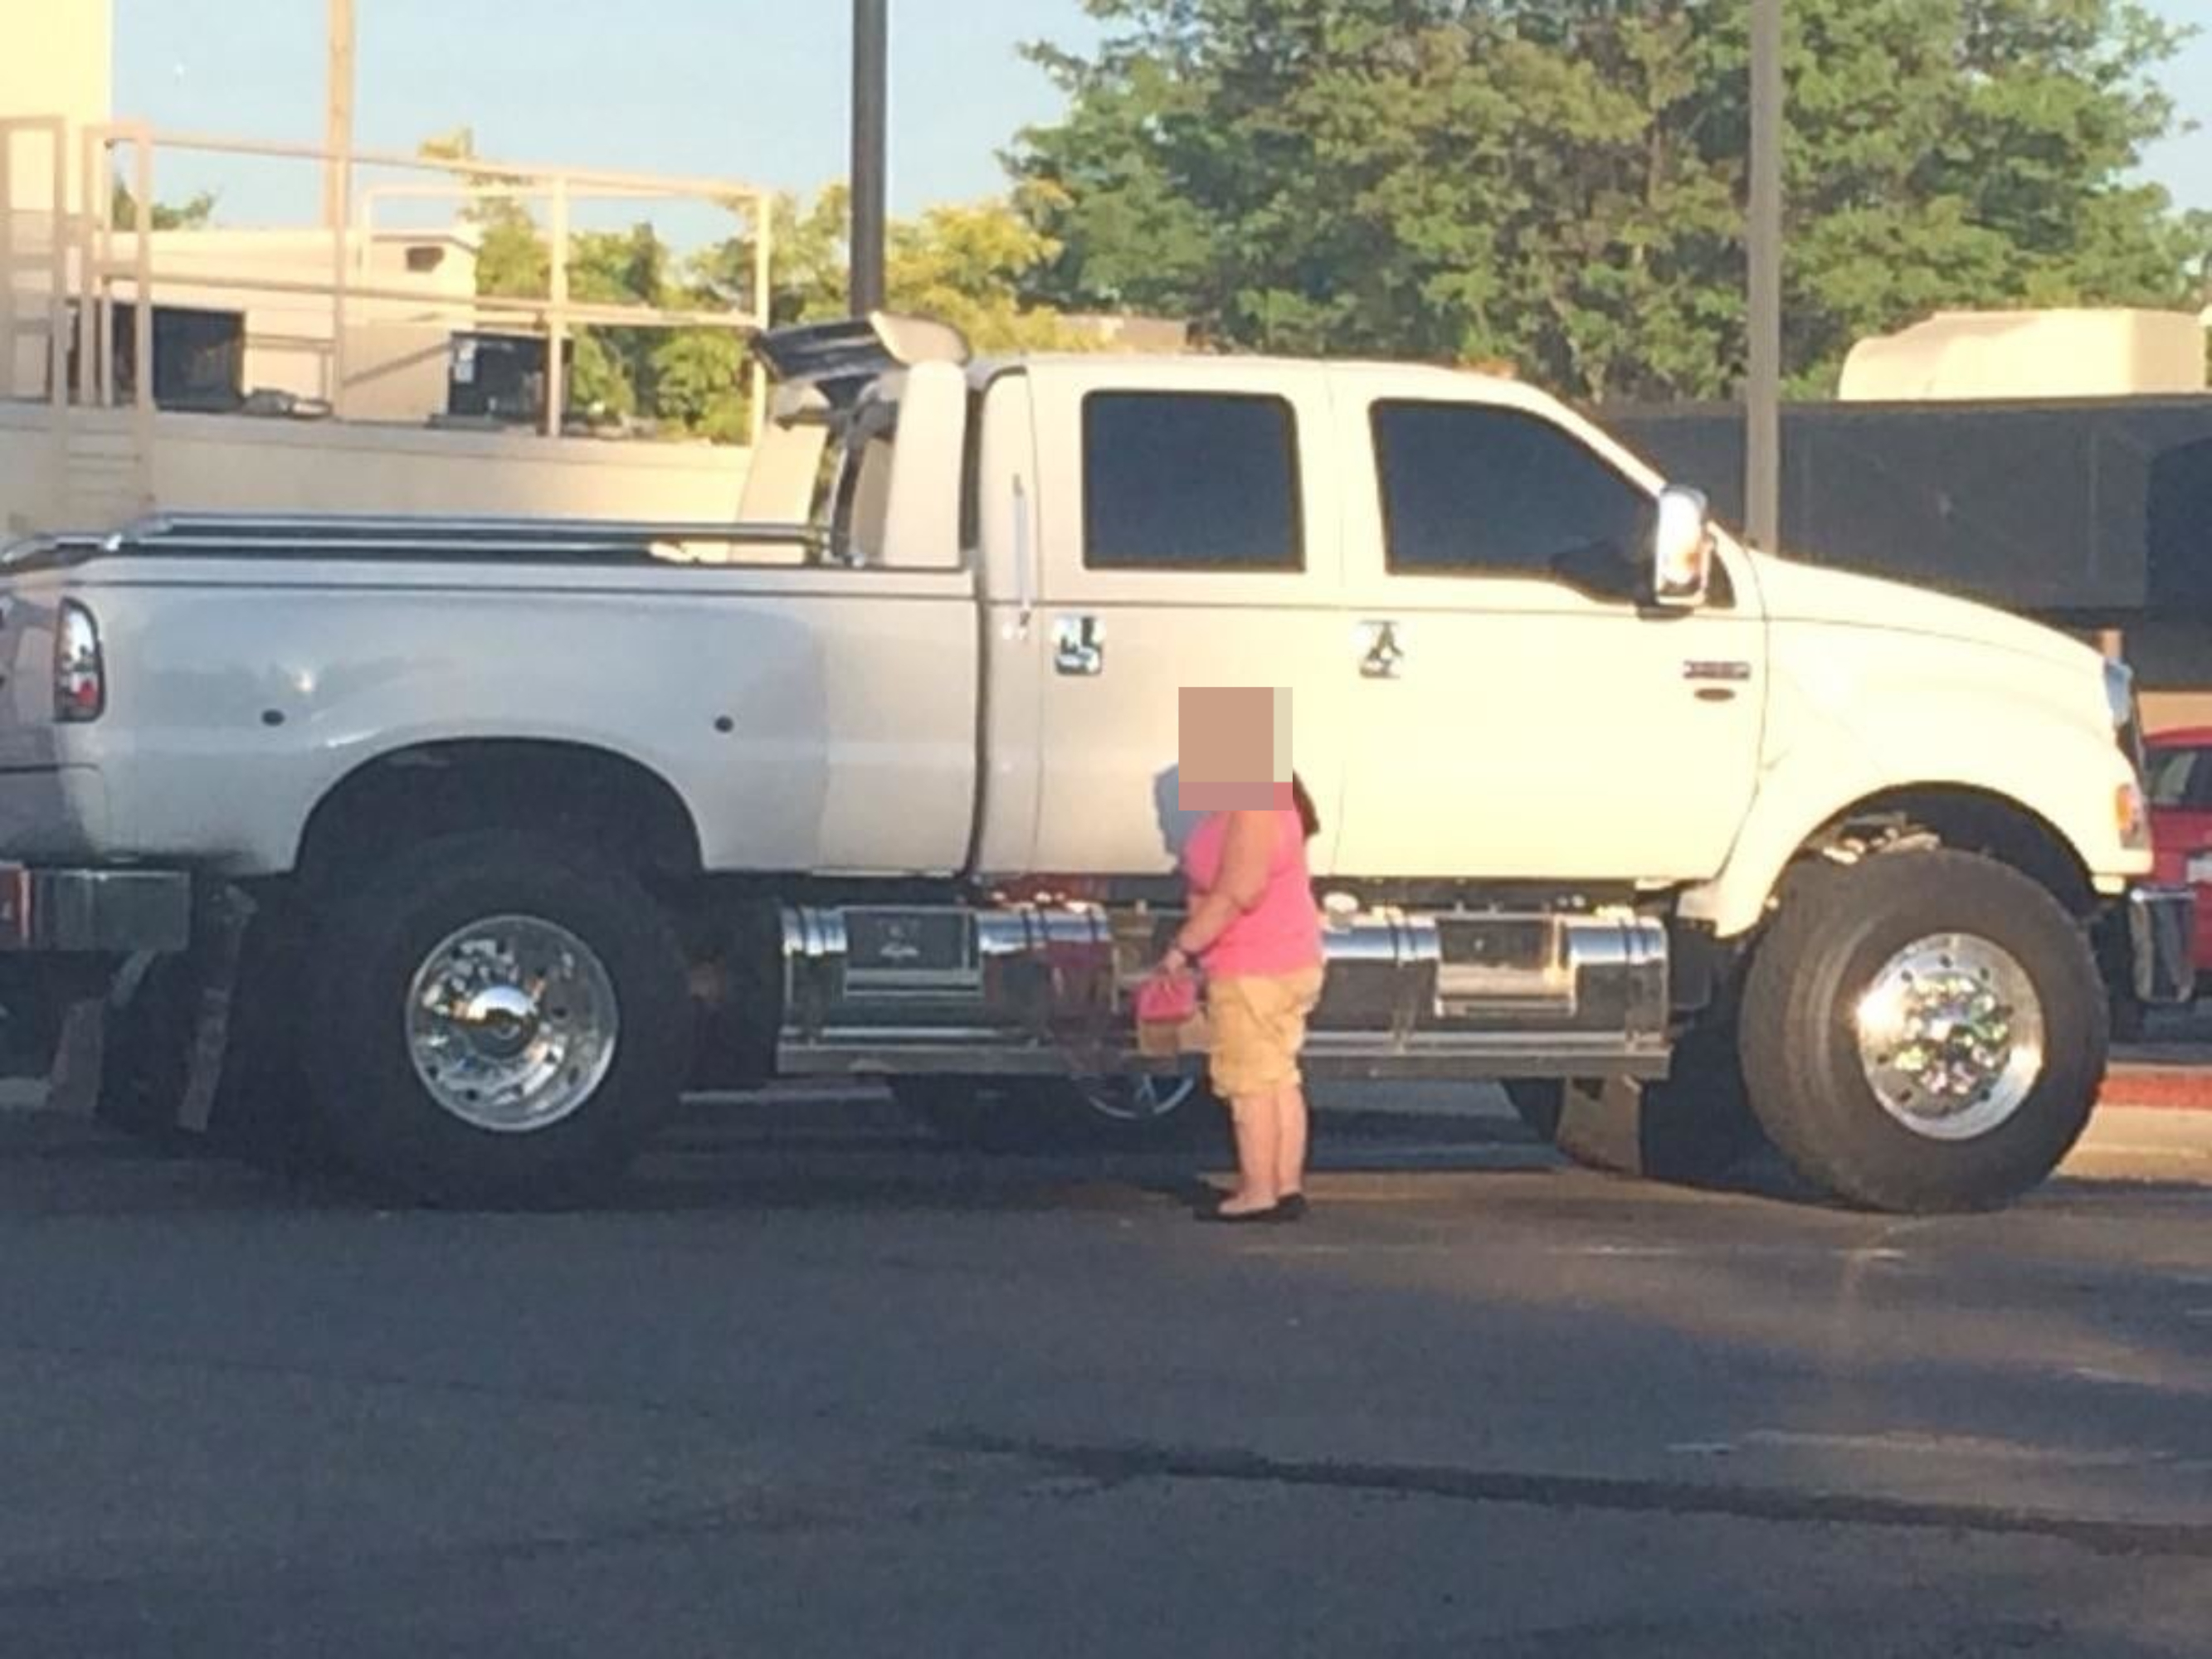 A person standing next to a large truck